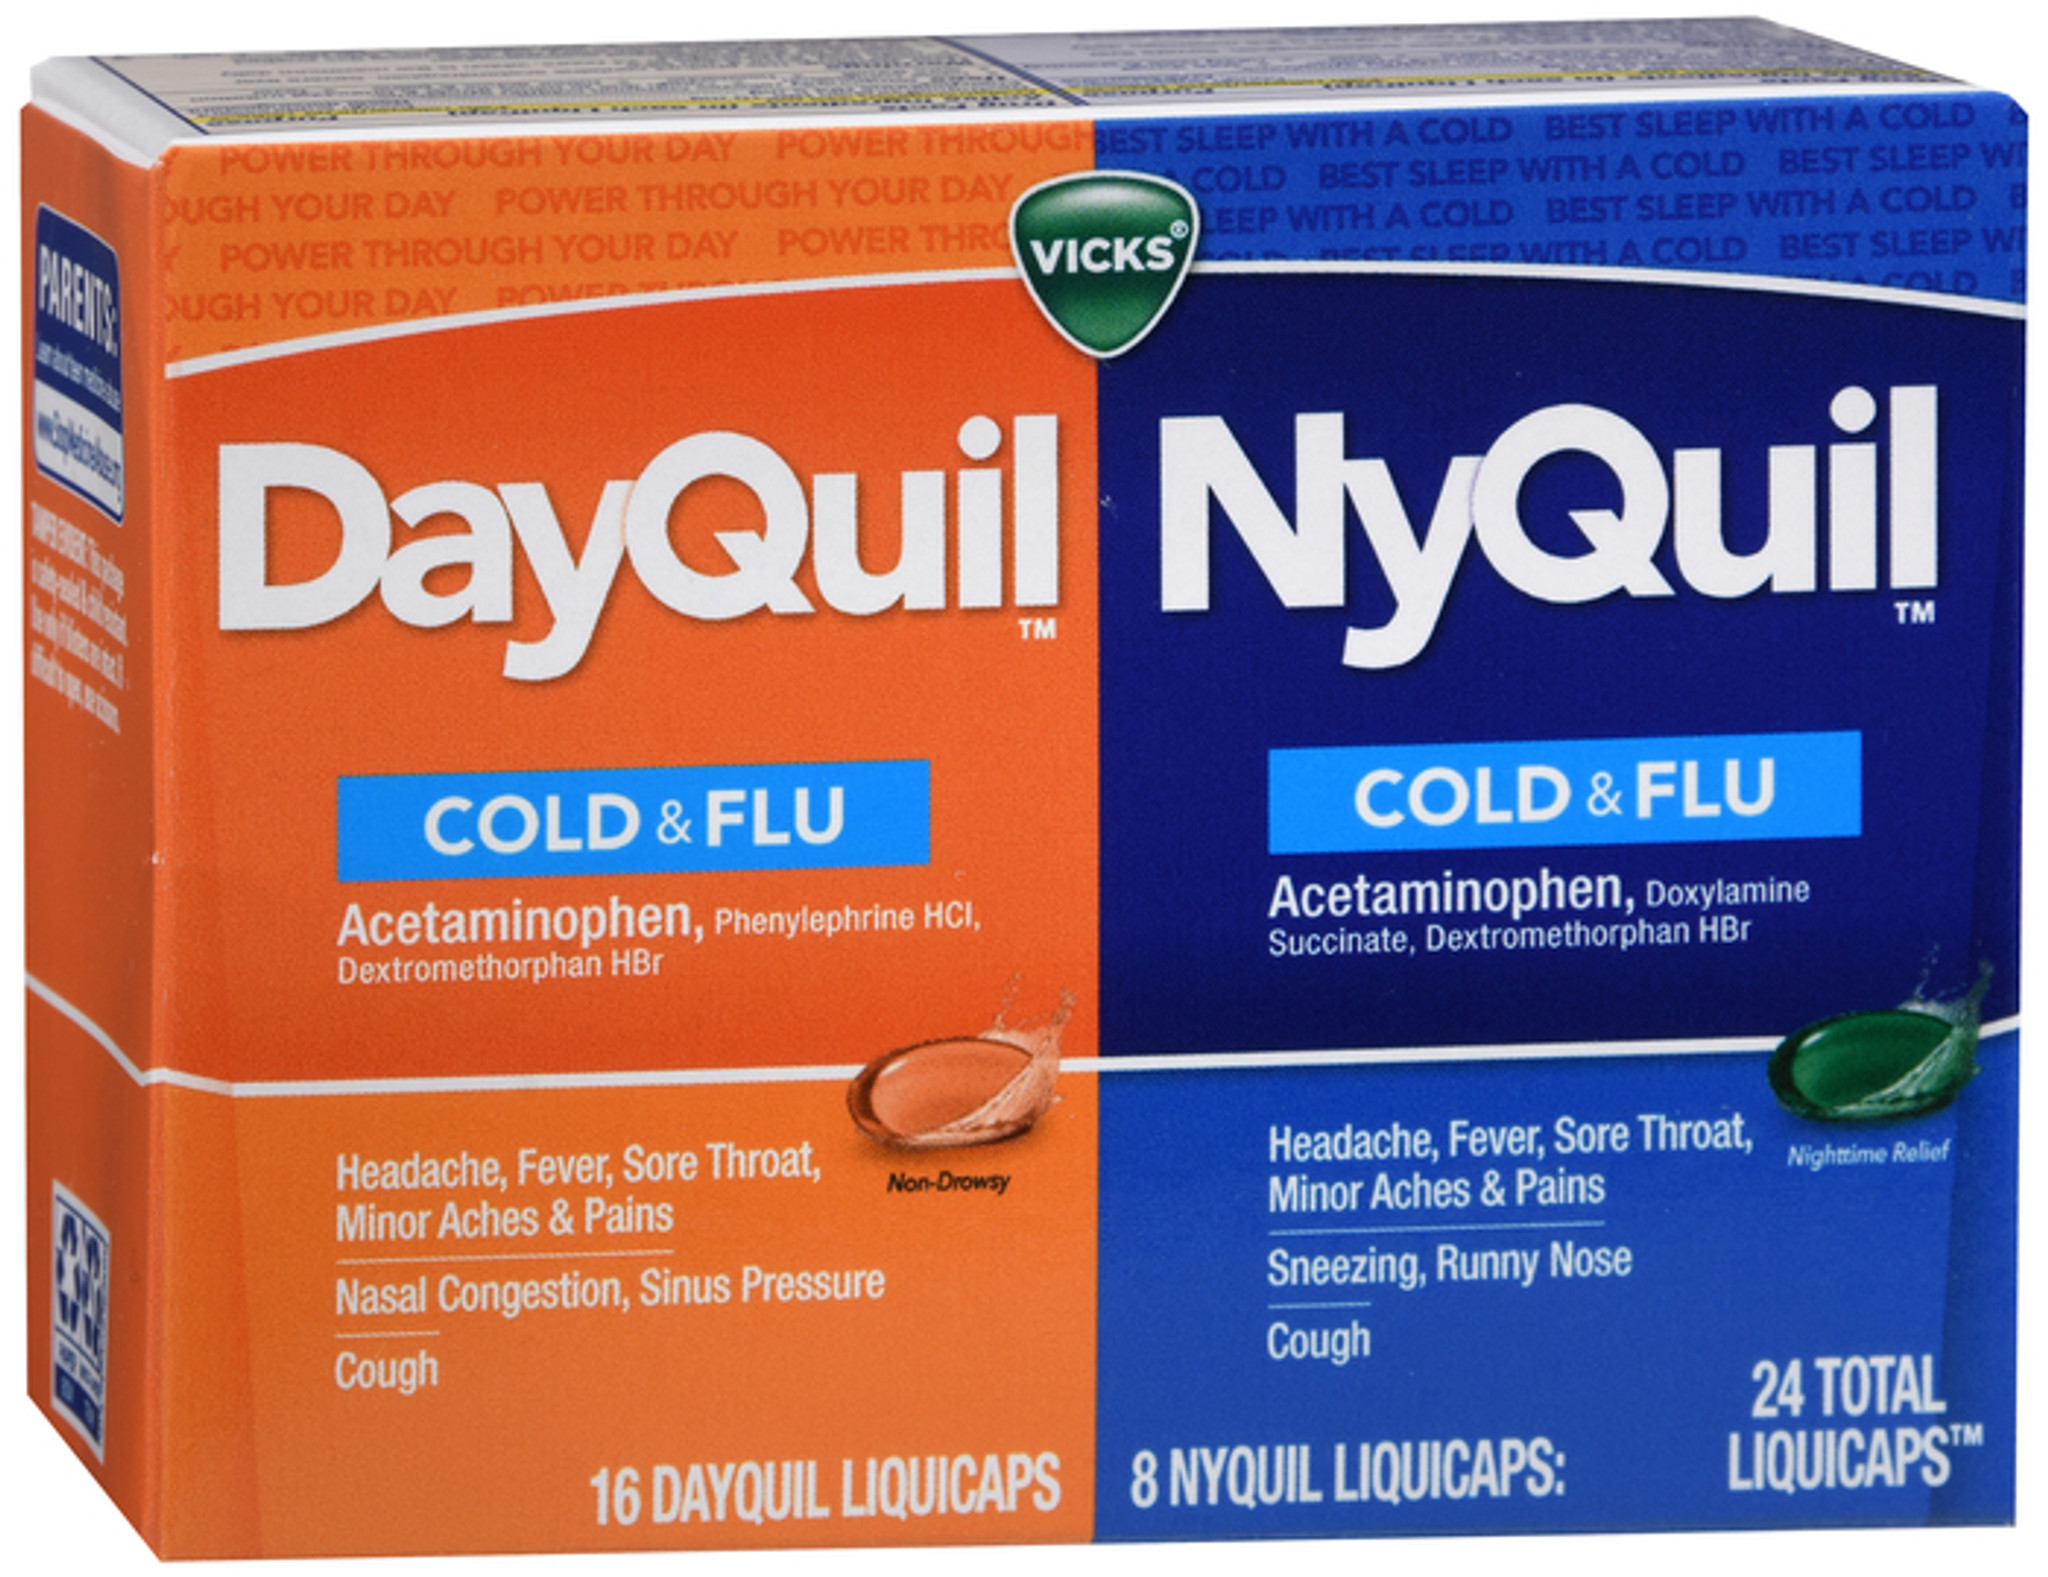 Vicks DayQuil Severe Cold & Flu LiquiCaps - 24 ct.